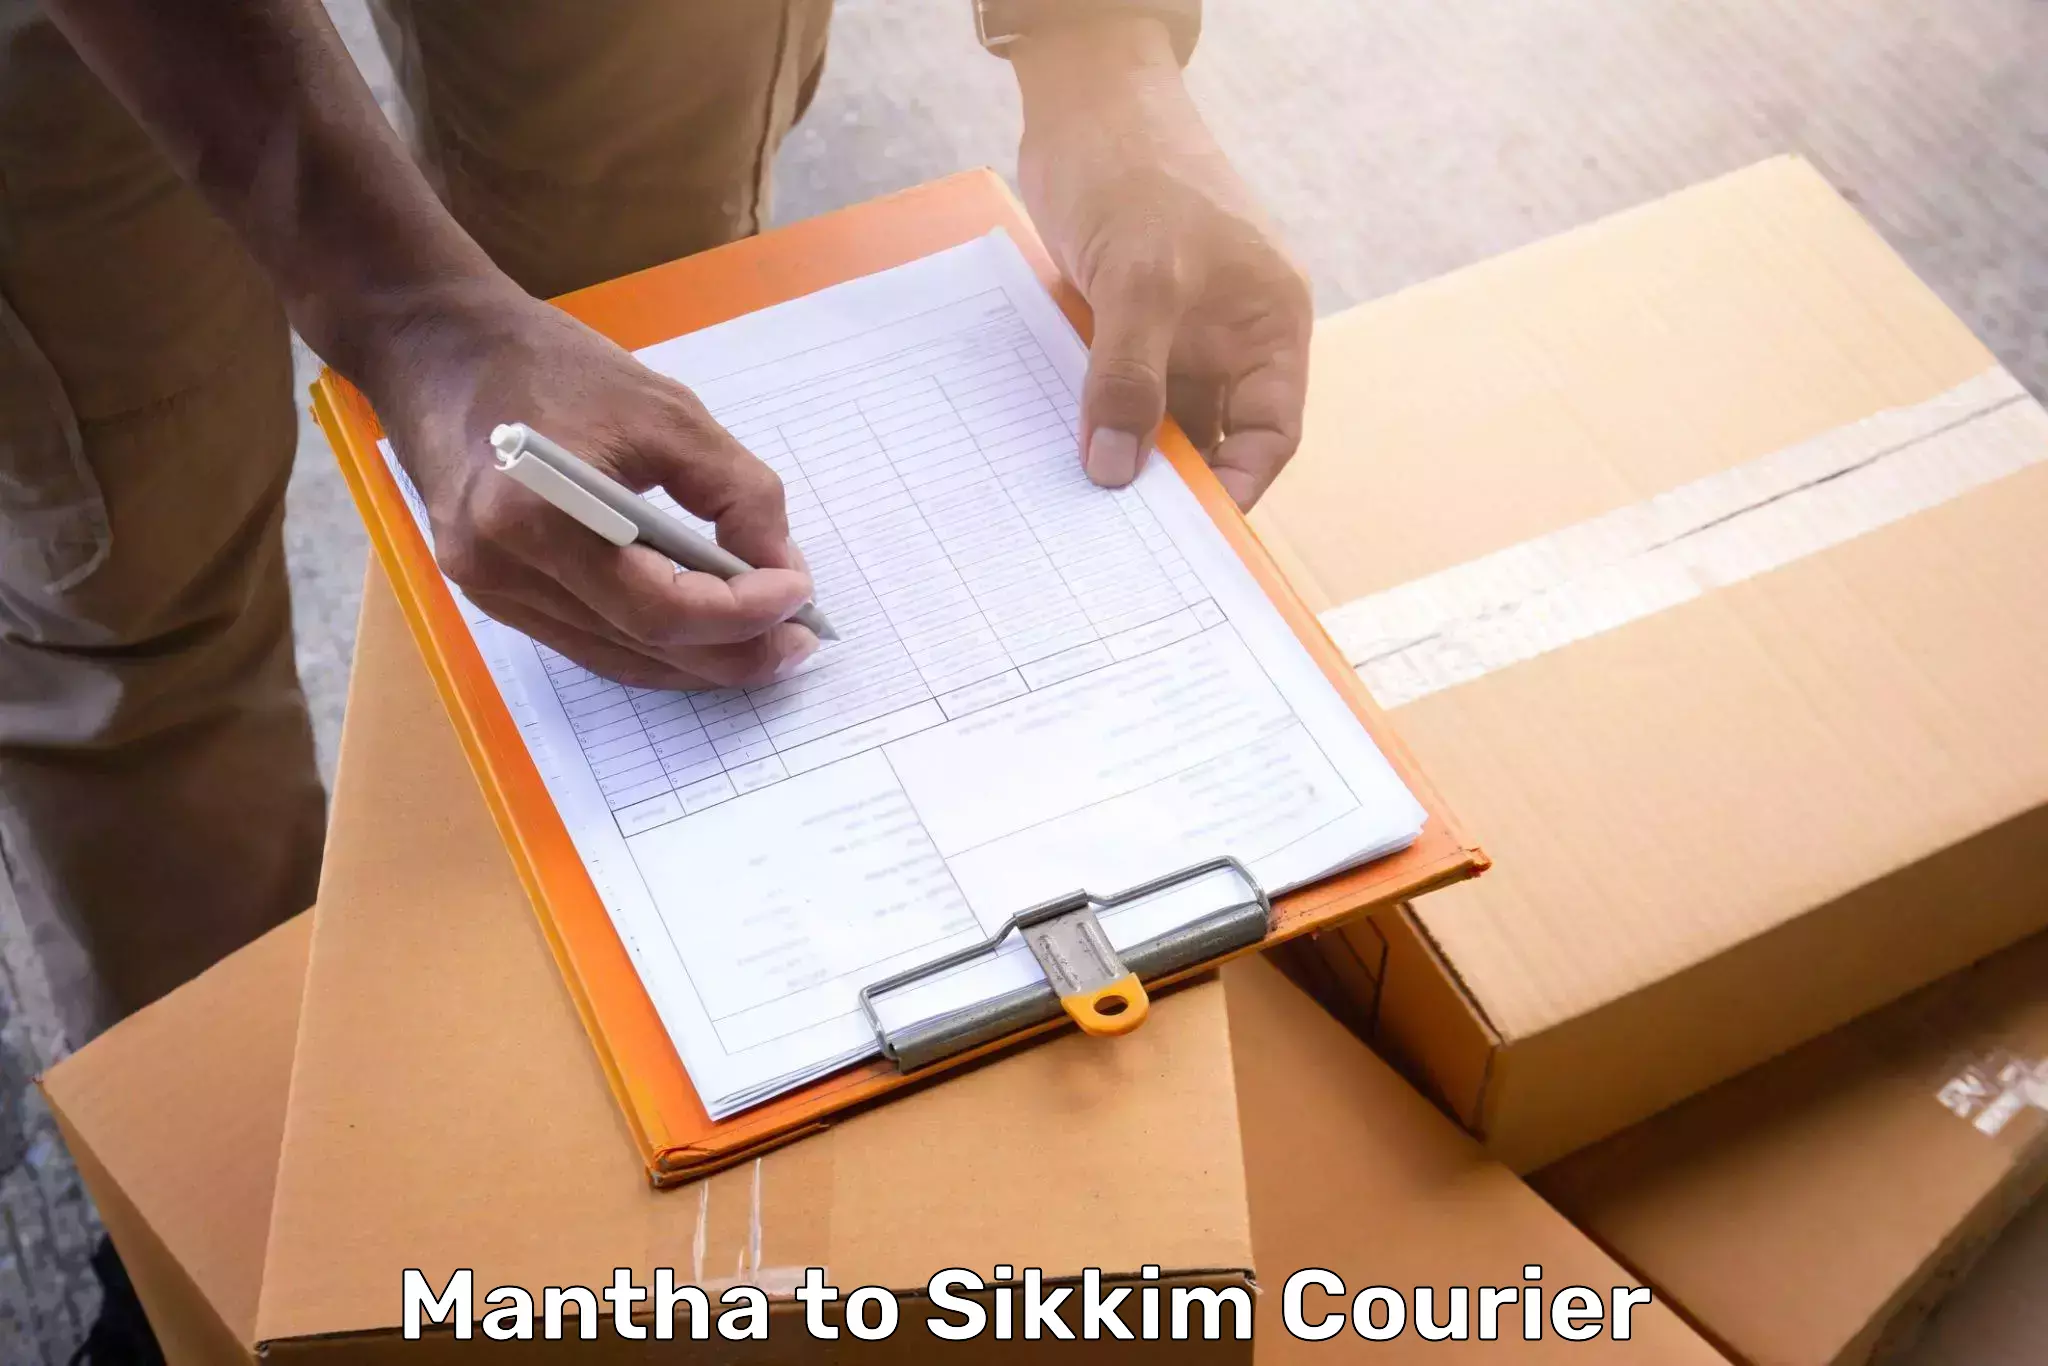 Luggage shipment specialists Mantha to Sikkim